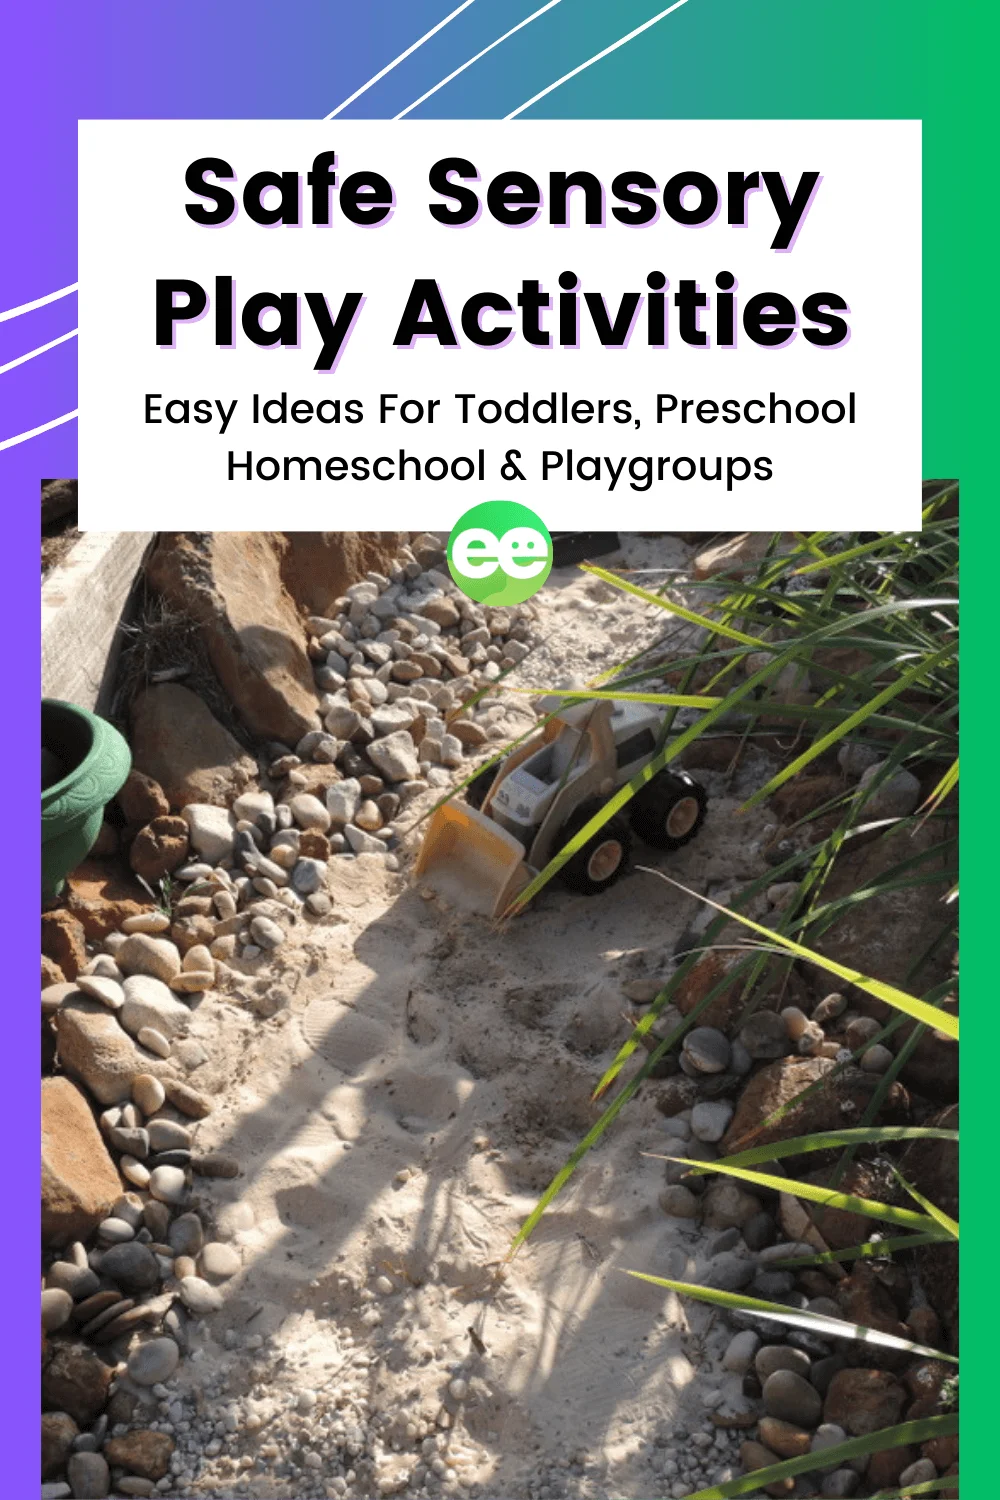 step-by-step recipes for easy to make sensory play experiences